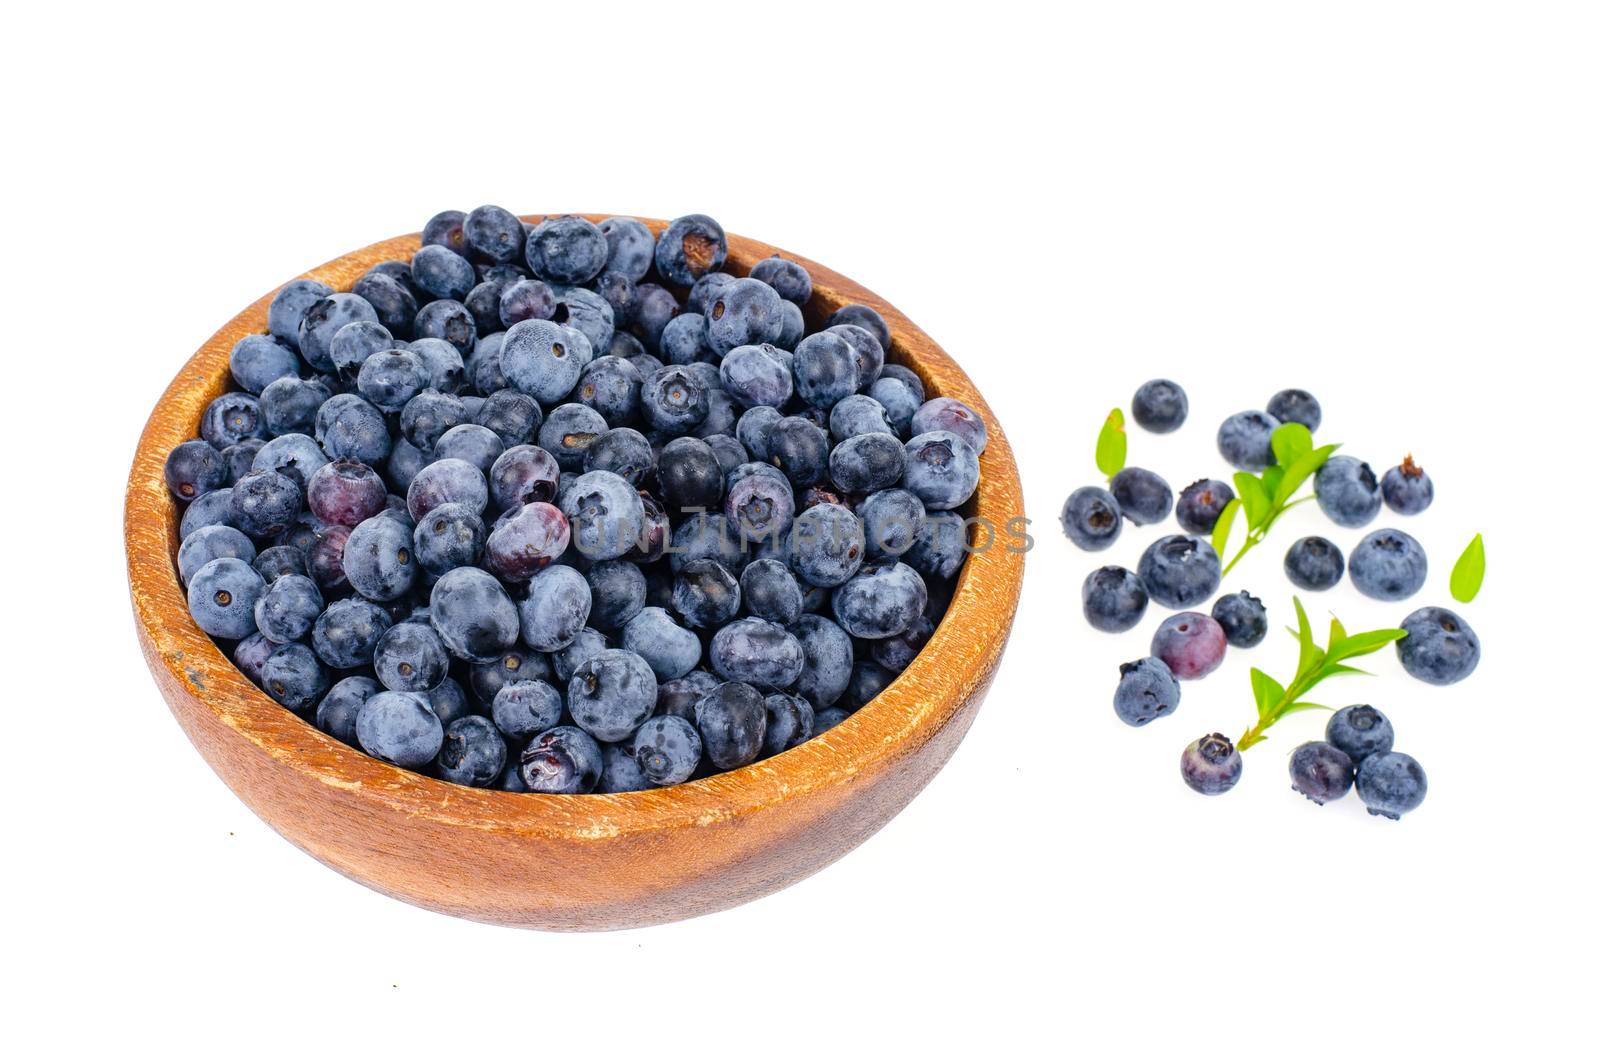 Wooden bowl with blue berry blueberry isolated on white background. Studio Photo